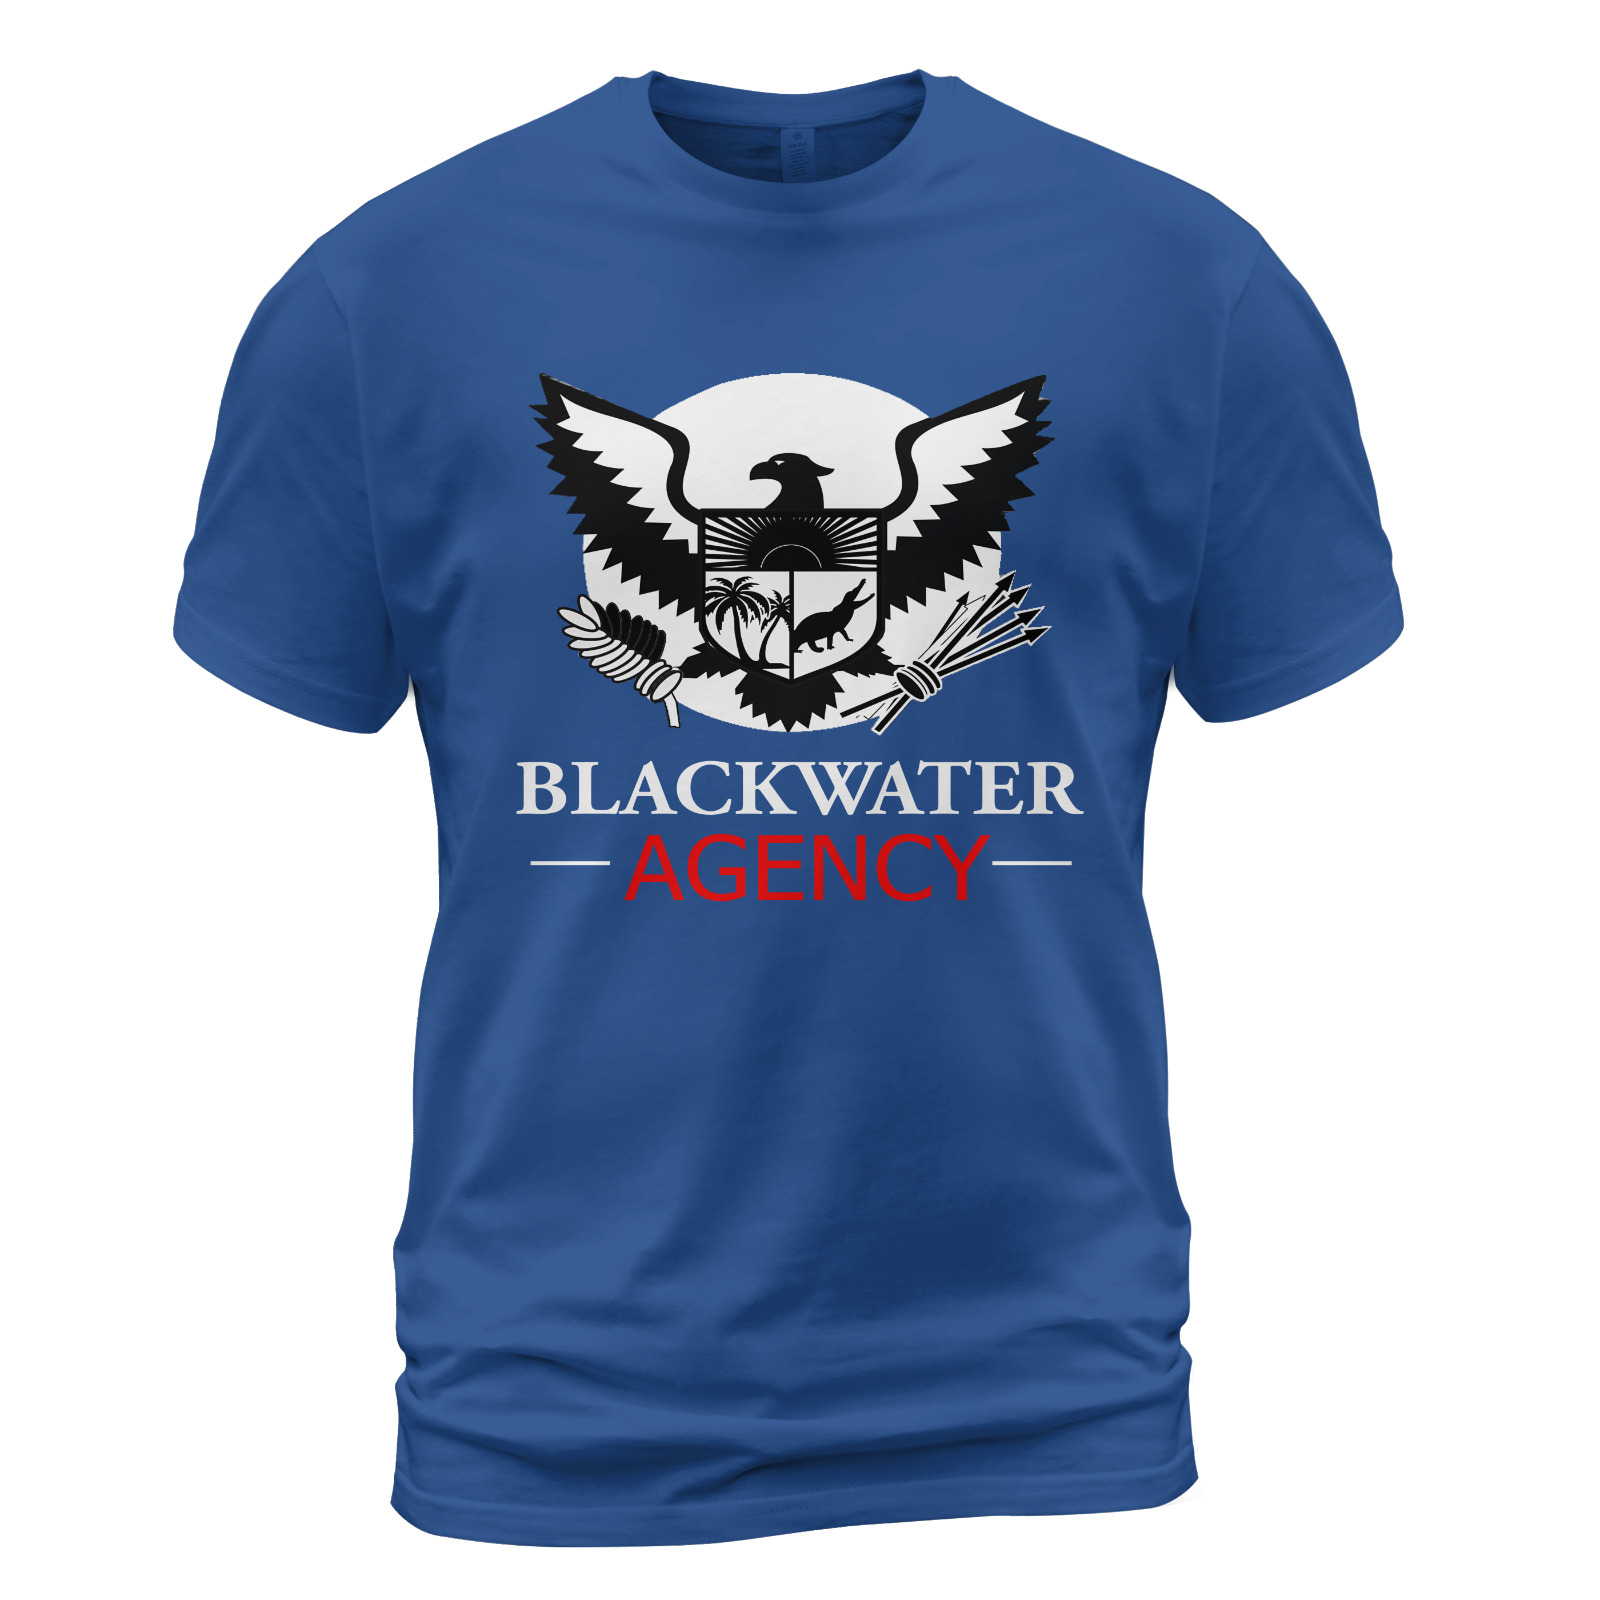 Blackwater Triple Canopy Academy Agency T-Shirt Made in USA Size S-5XL